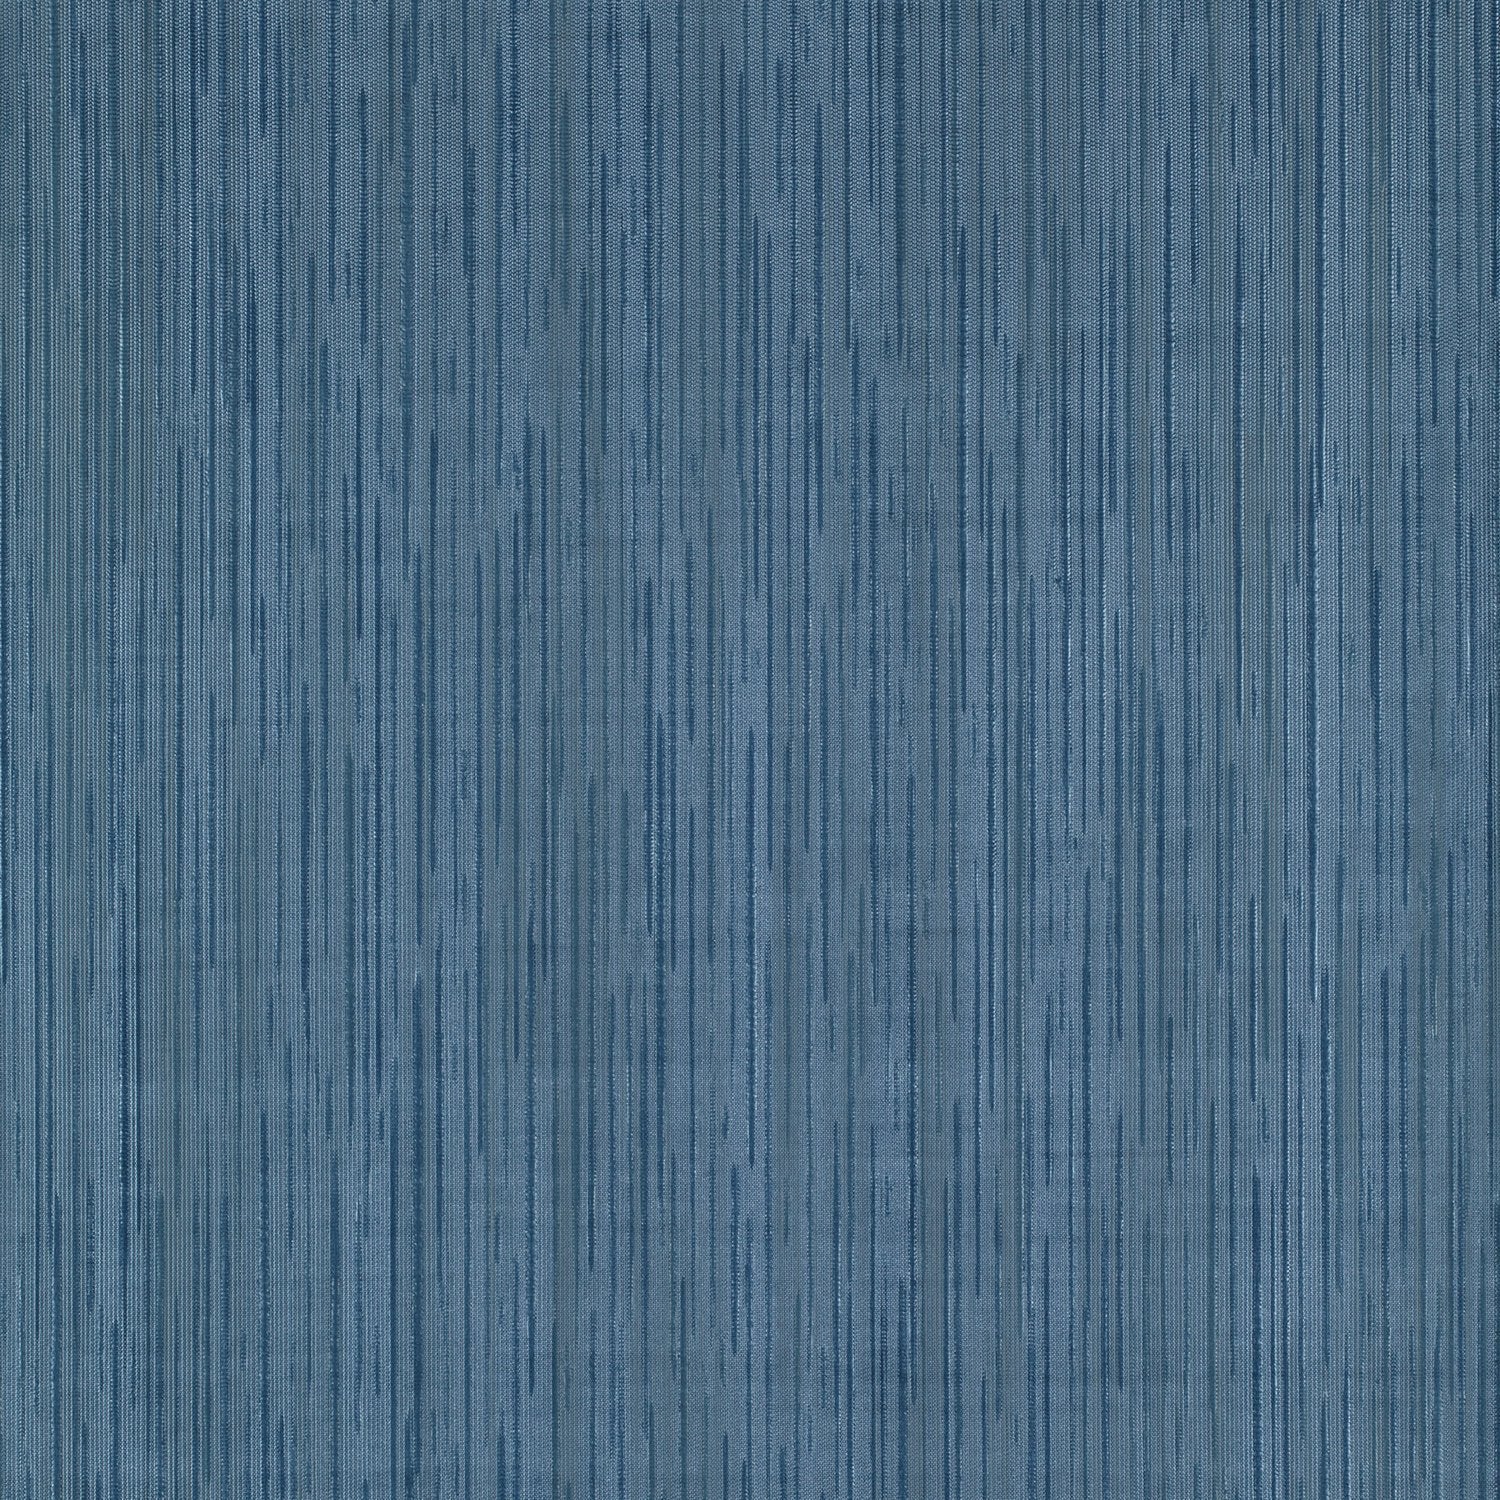 Skyward - Y46783 - Wallcovering - Vycon - Kube Contract